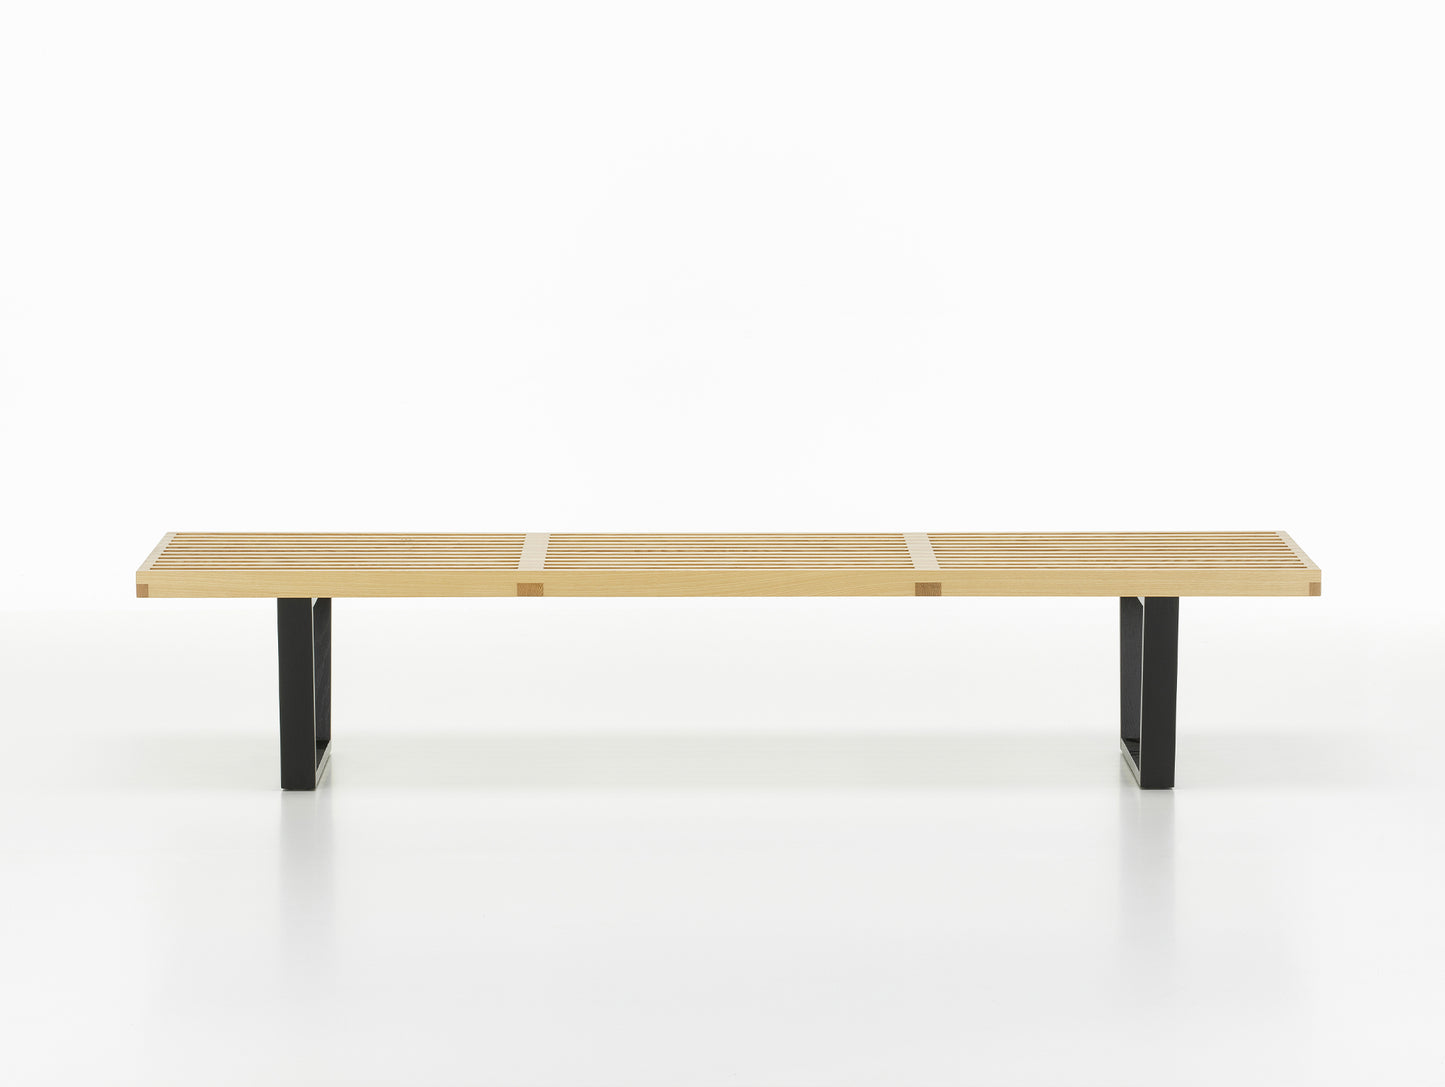 Long Nelson Bench by Vitra - Natural Lacquered Ash